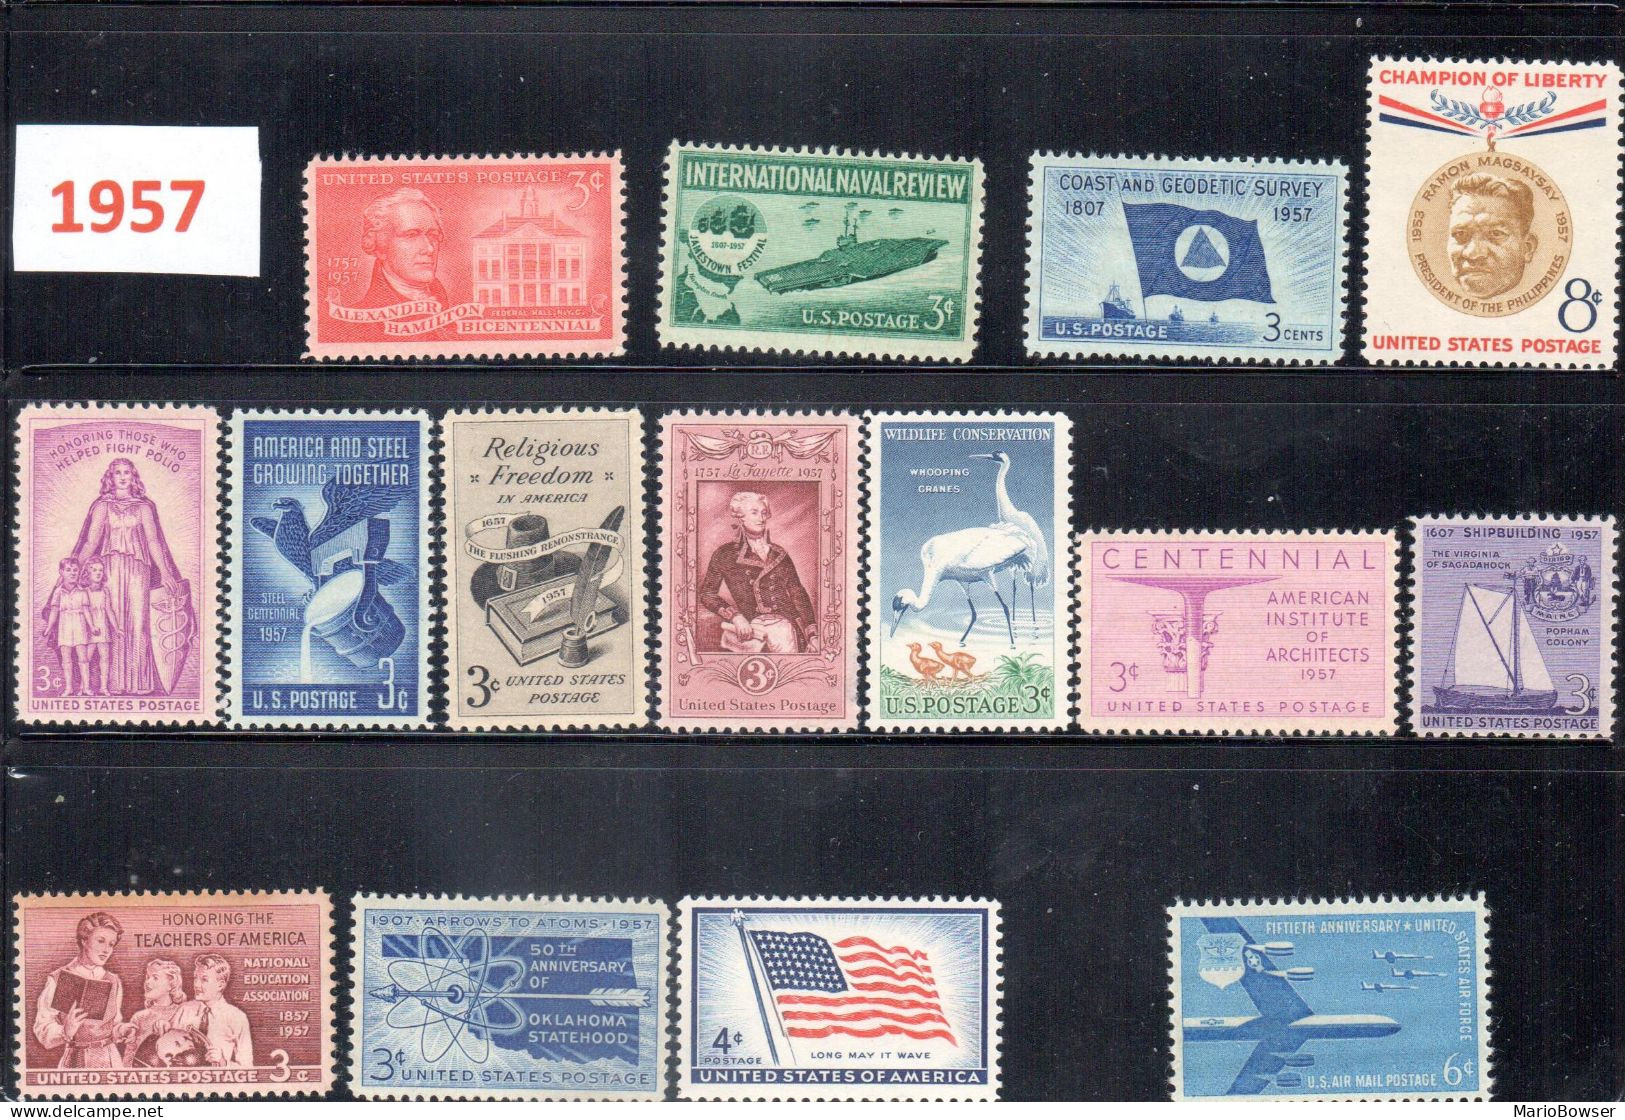 USA 1957 Full Year Commemorative MNH Stamps Set 15 Stamps With Airmail - Annate Complete